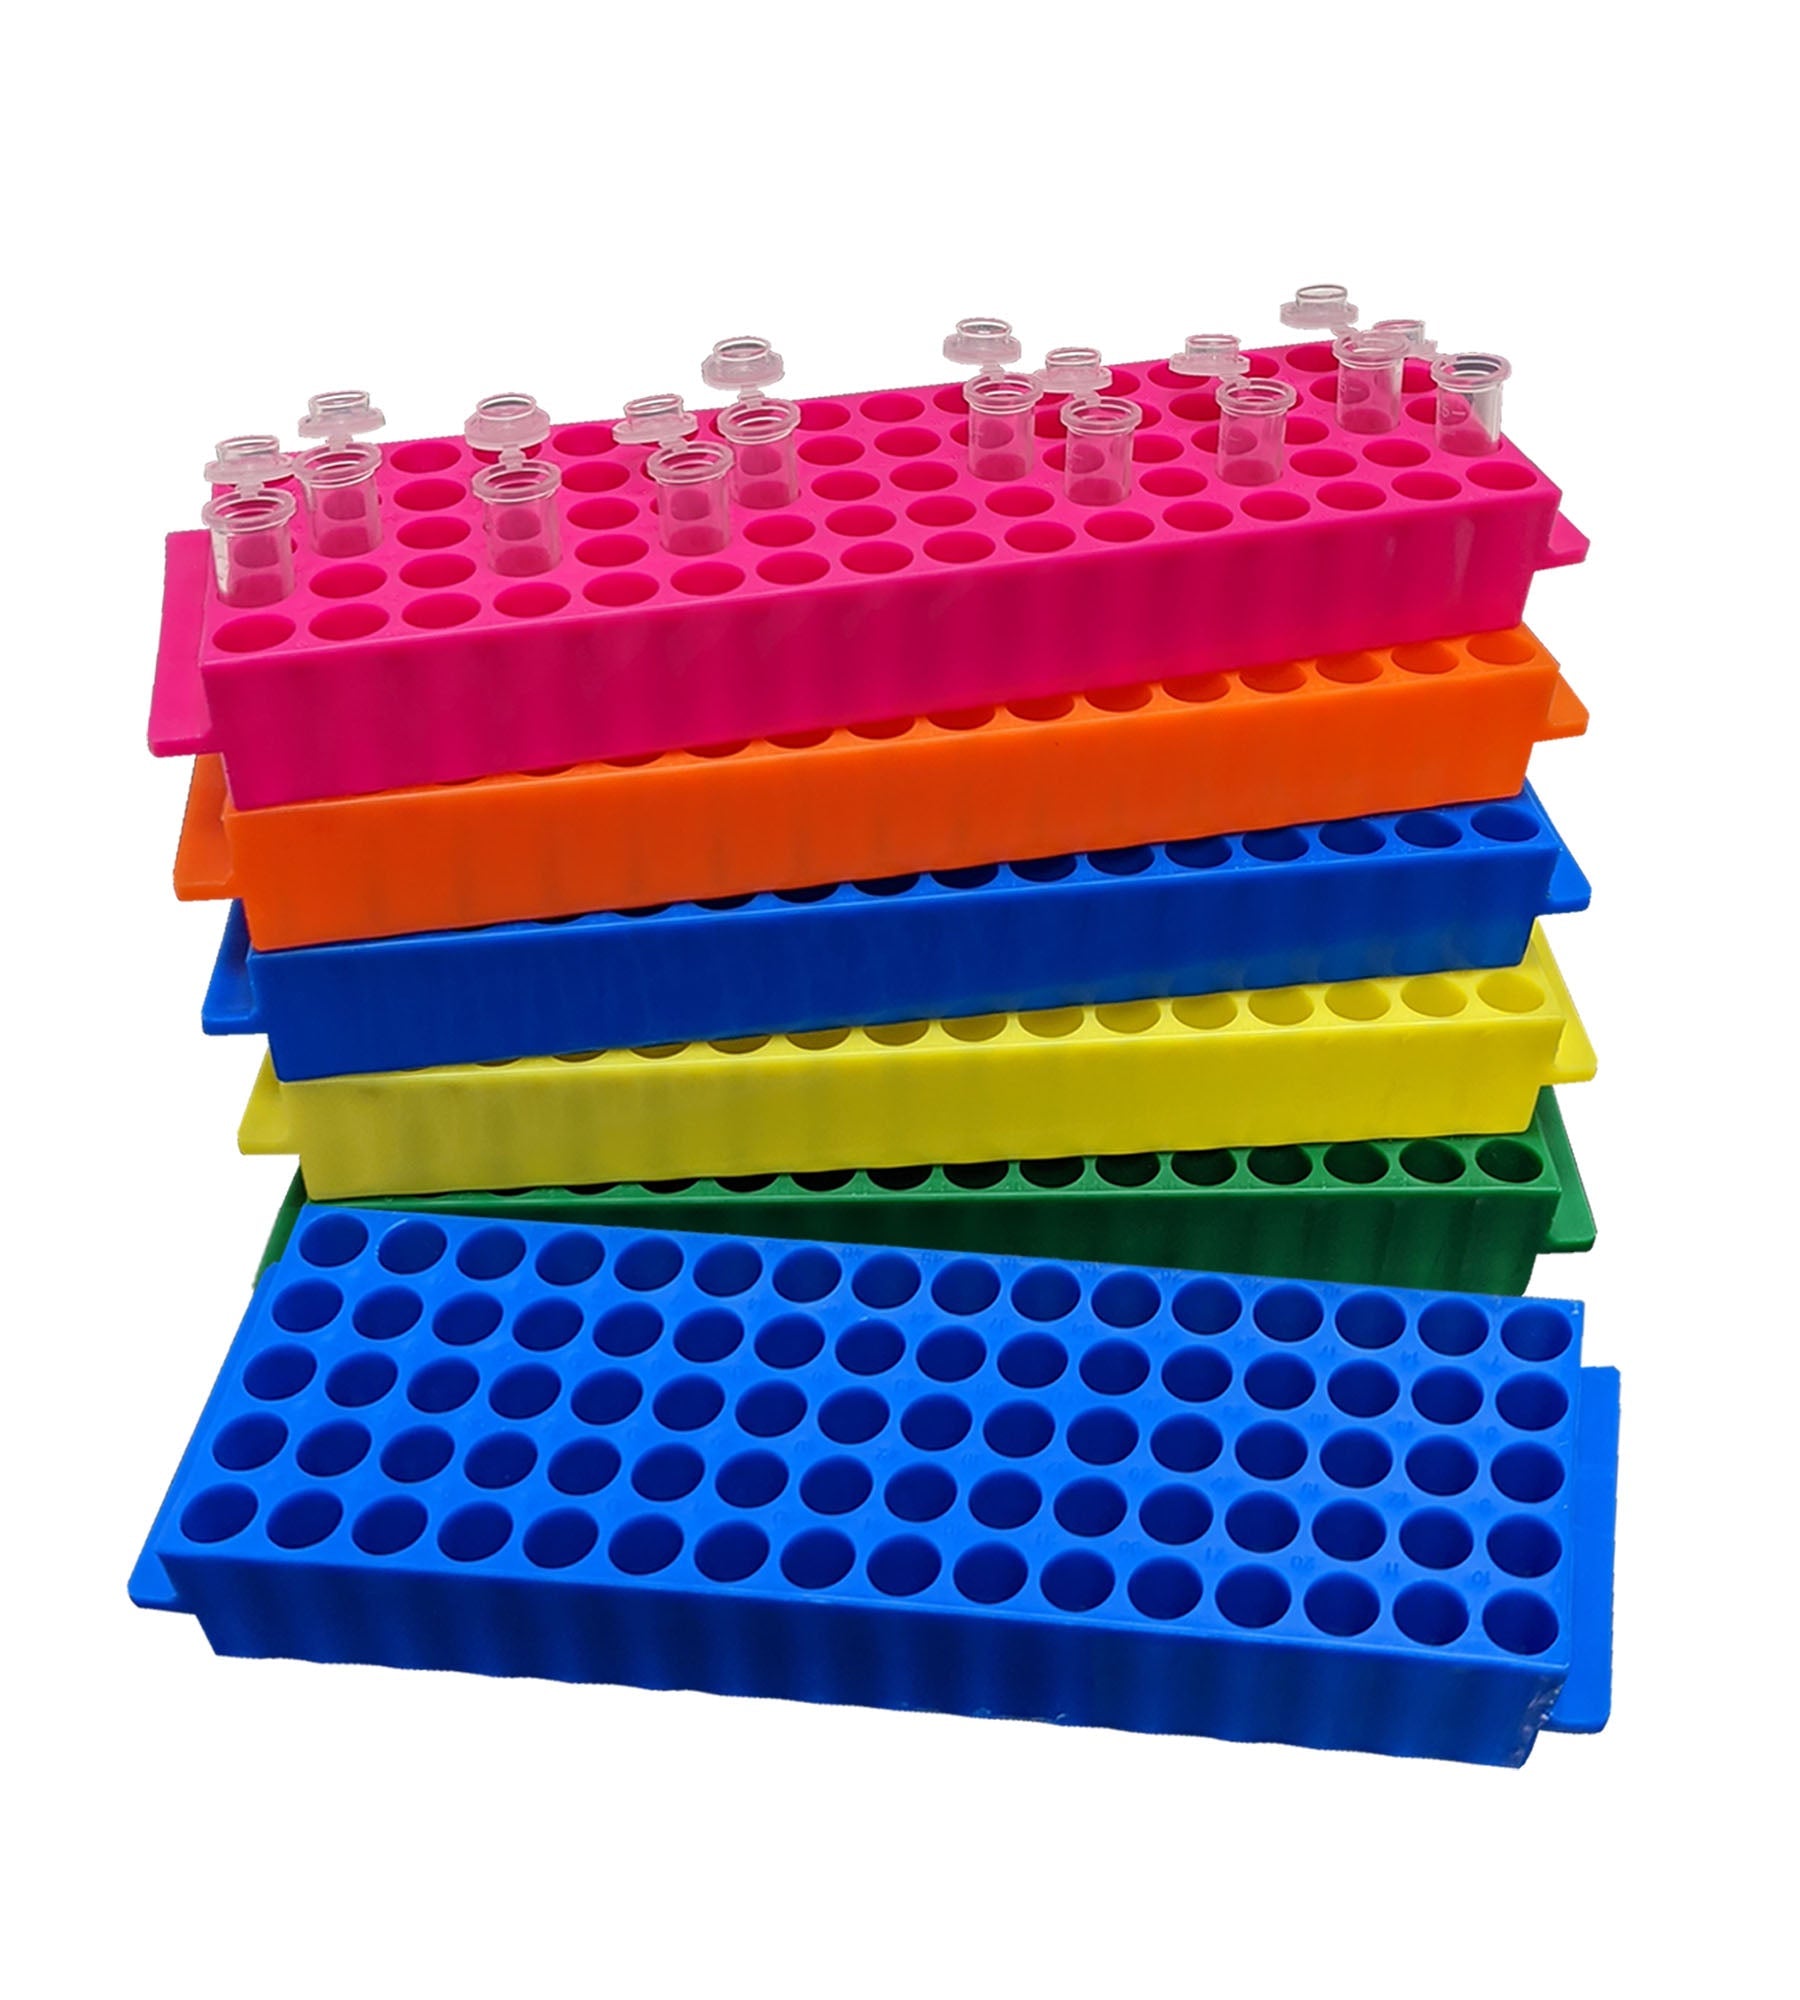 MTC Bio R1040, Tube Rack, Fraction Collector Type, 80 x 1.5ml/2ml, Assorted Colors (B, G, R, Y, O), Pack Of 5